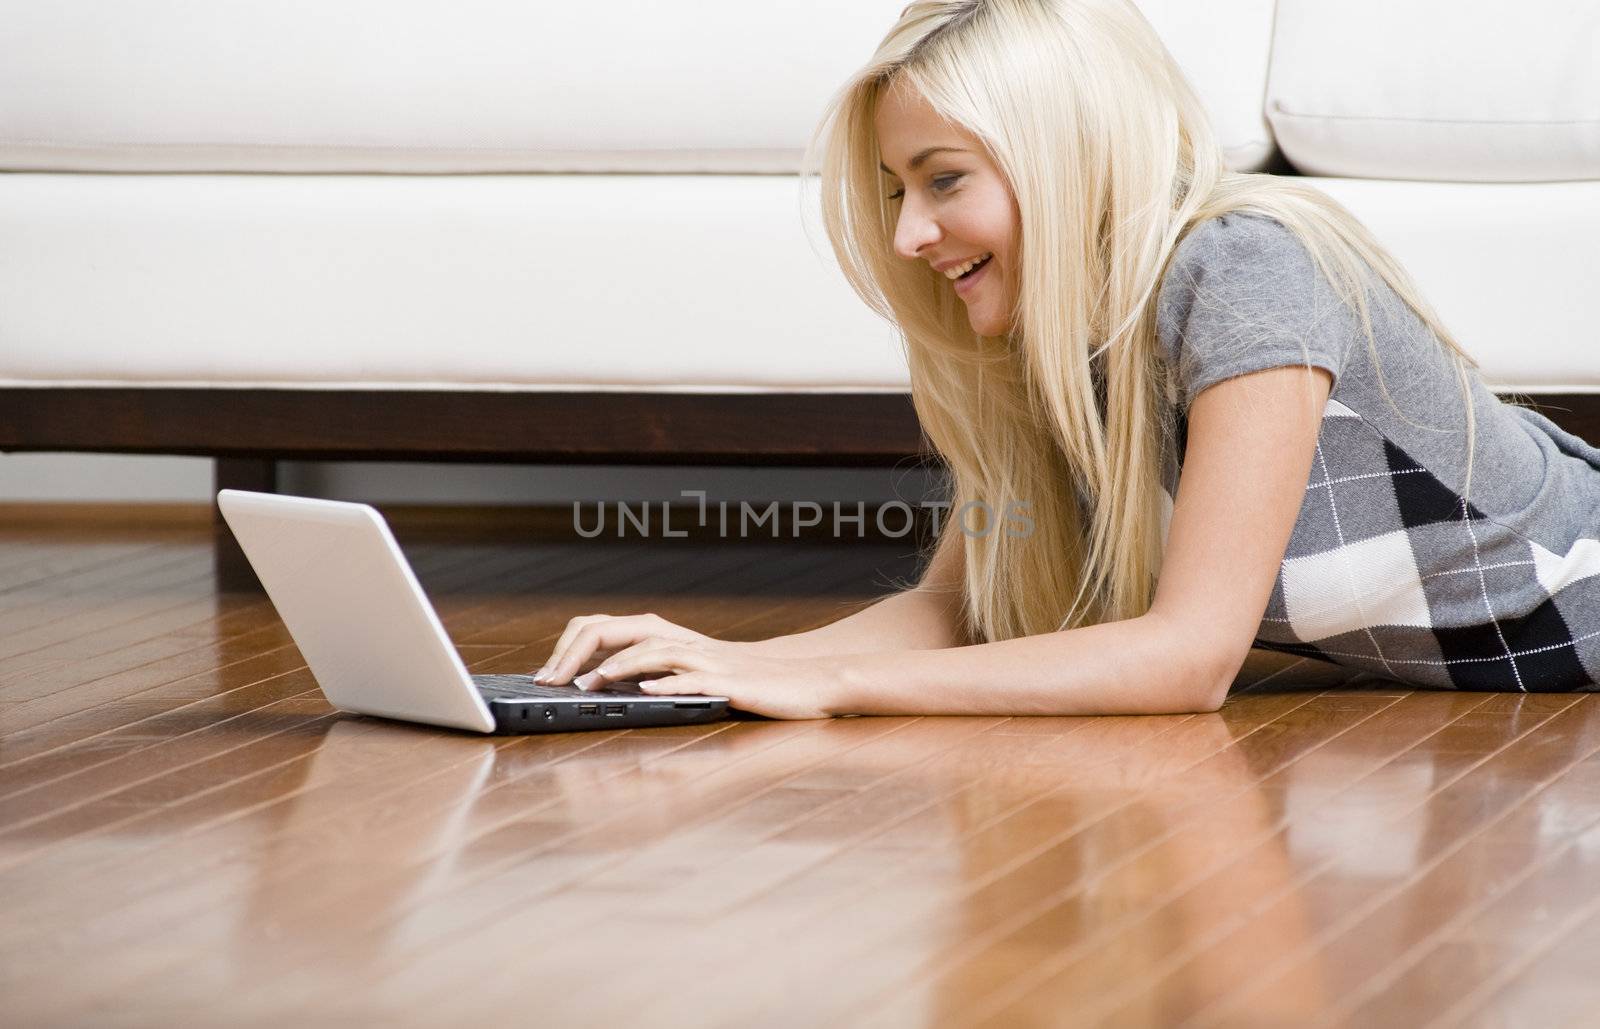 Smiling woman stretches out on the living room floor with her laptop. Horizontal format.